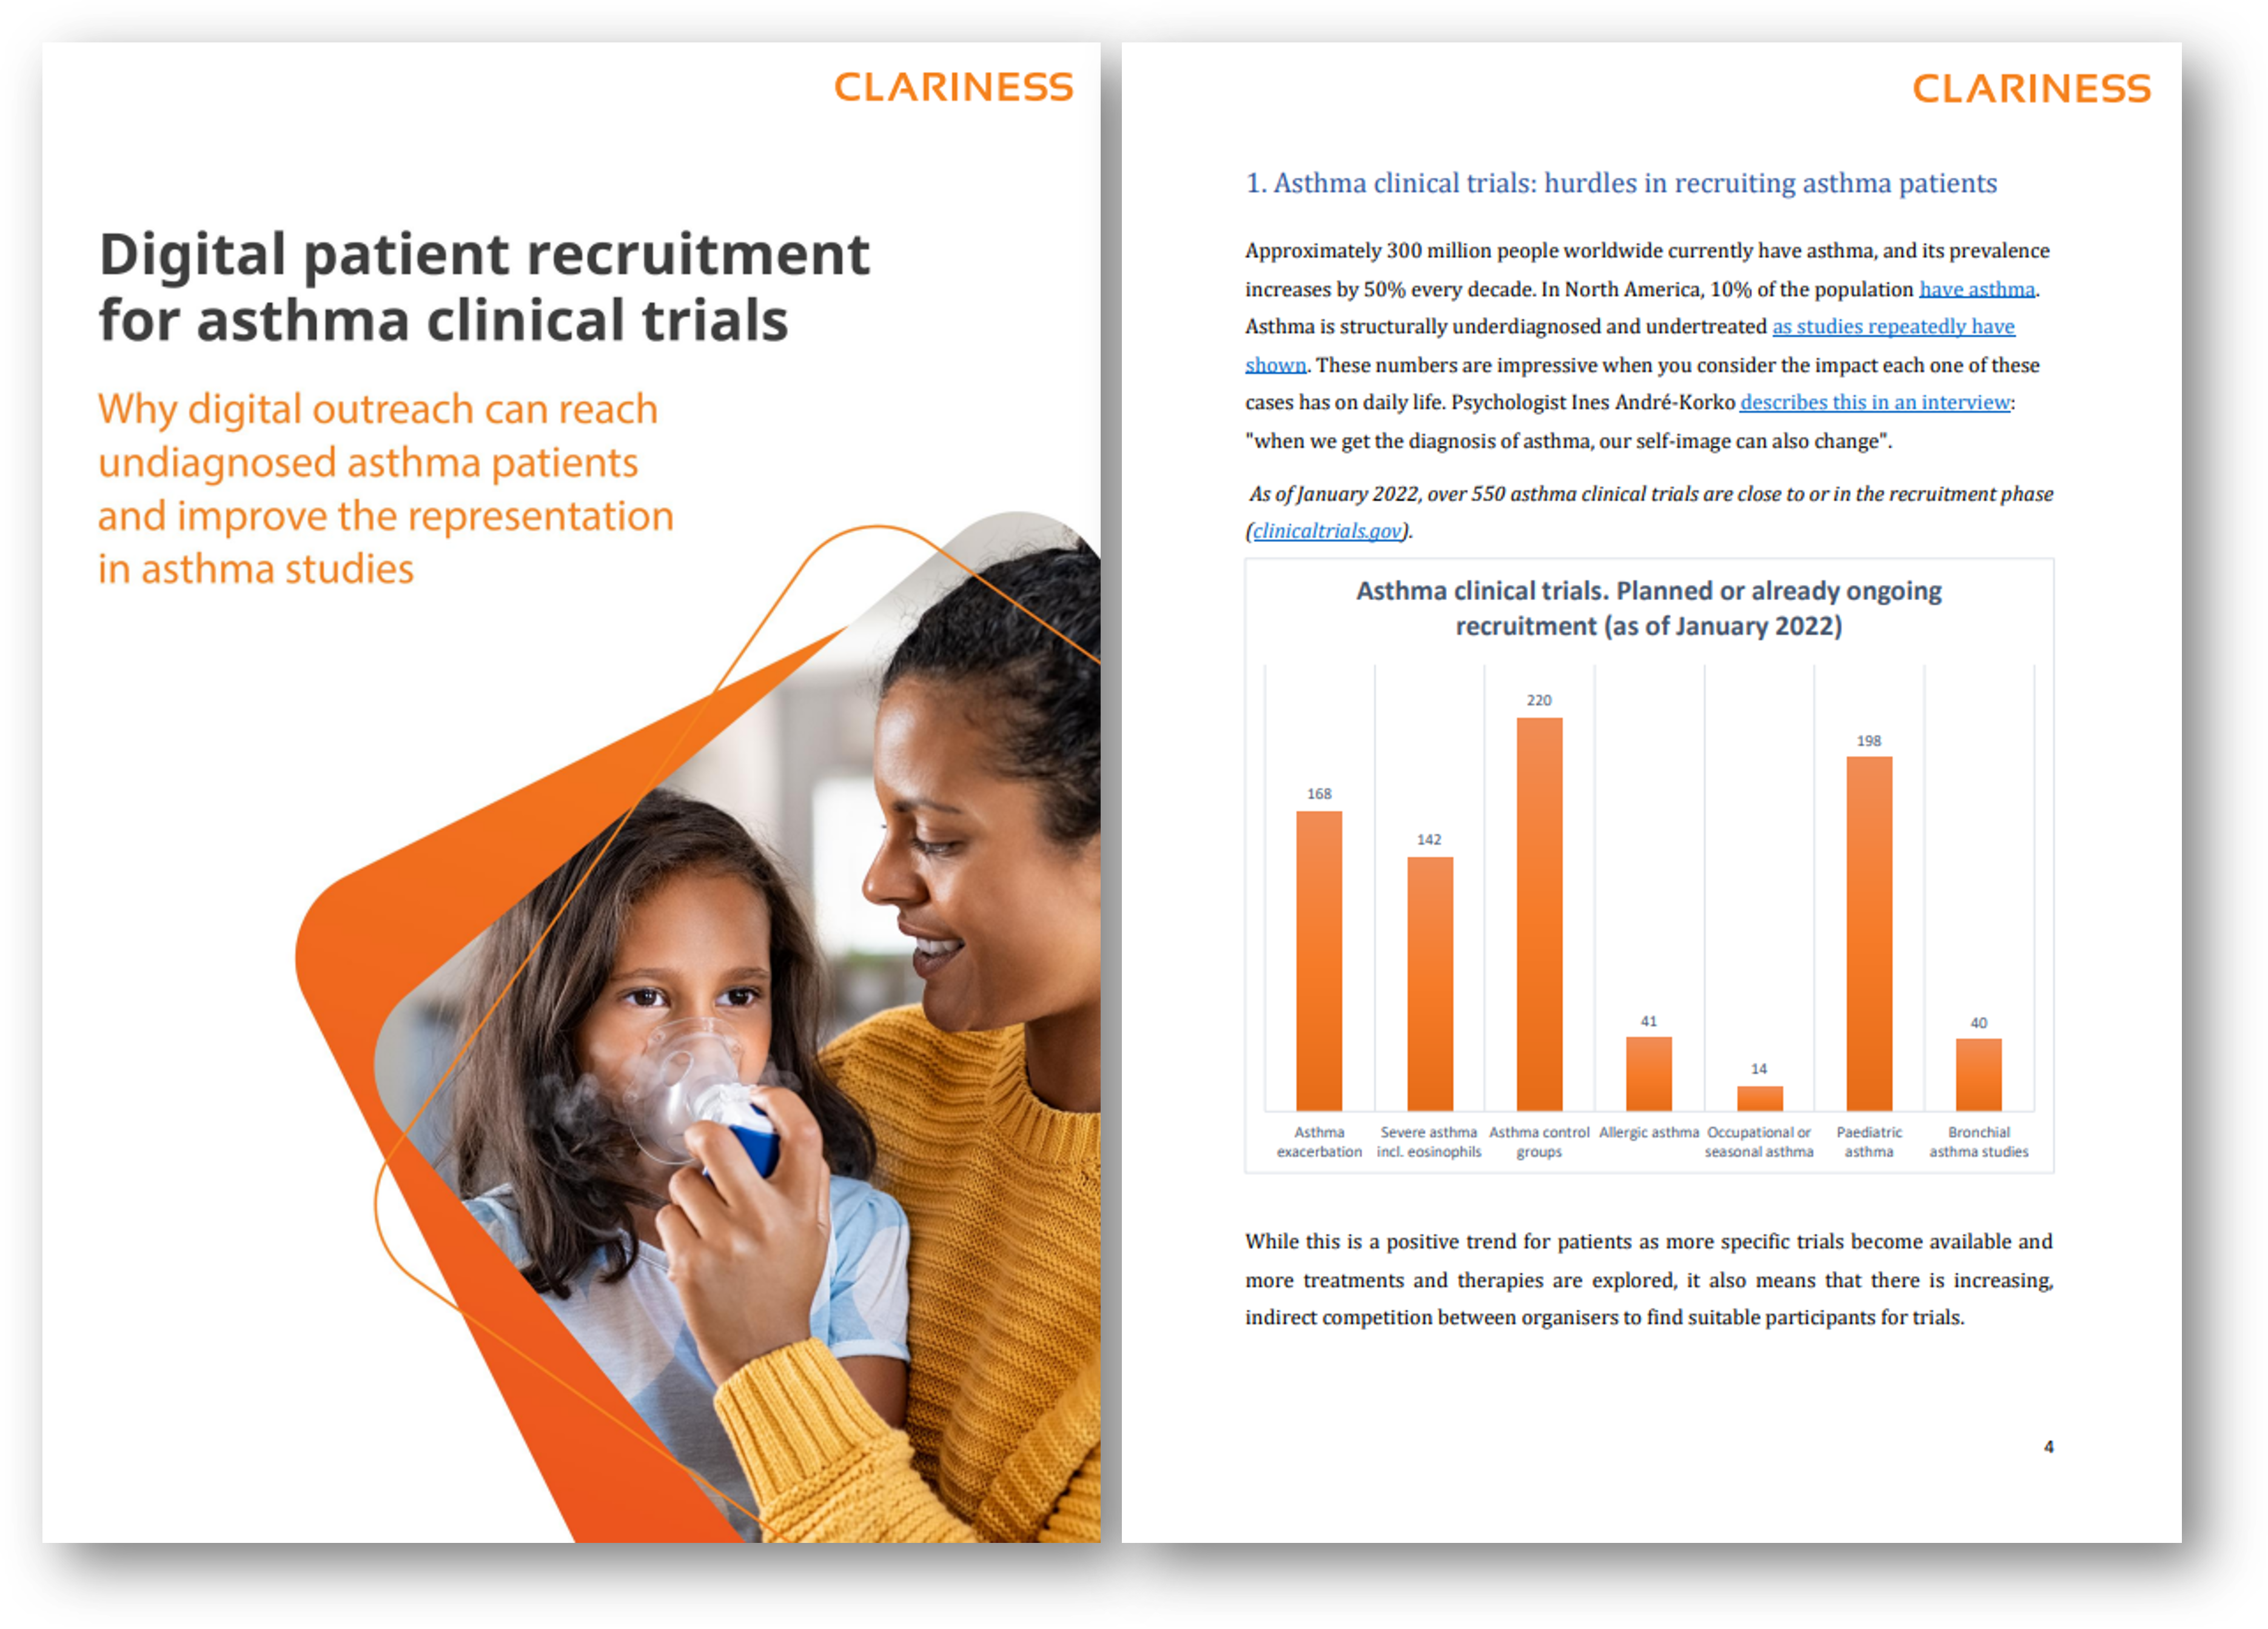 Whitepaper on asthma patient recruitment for clinical trials